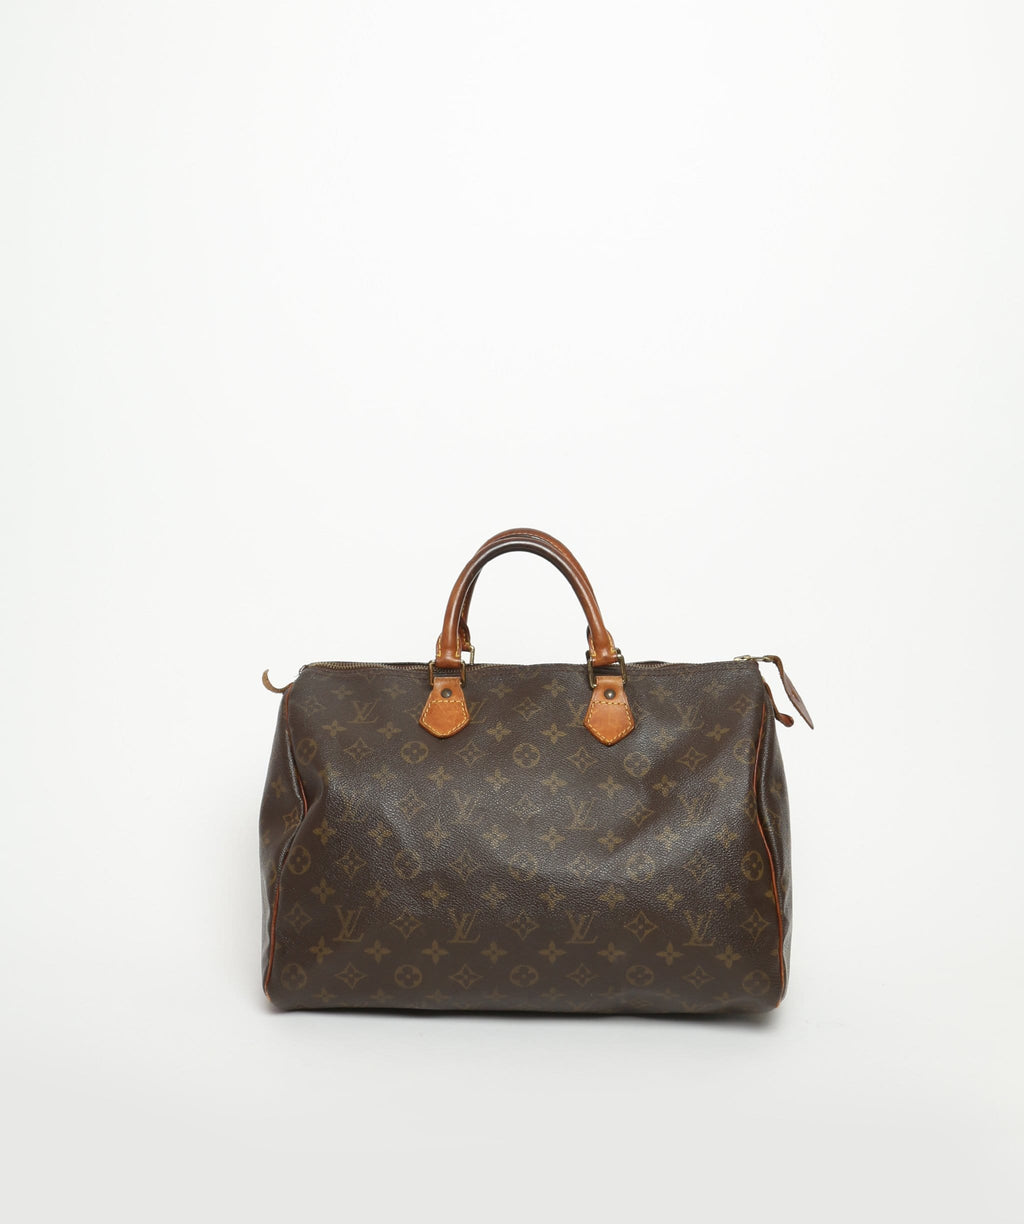 New Vintage x Louis Vuitton Speedy 35 with Hand-Painted Blue and